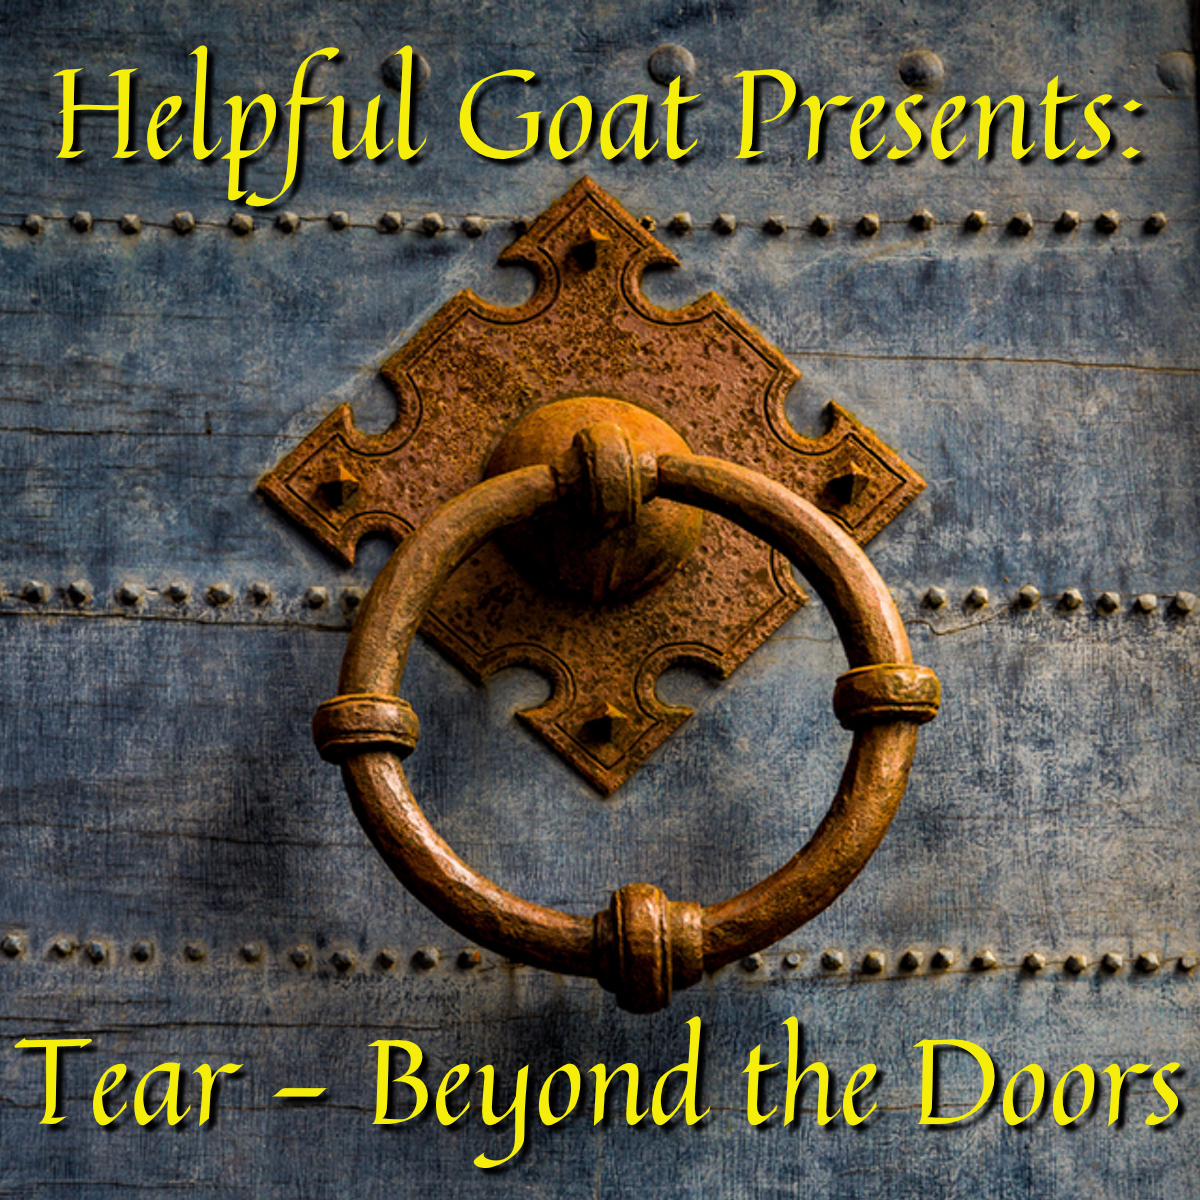 Tear: Beyond the Doors, Ep 21 - A Blighted Land